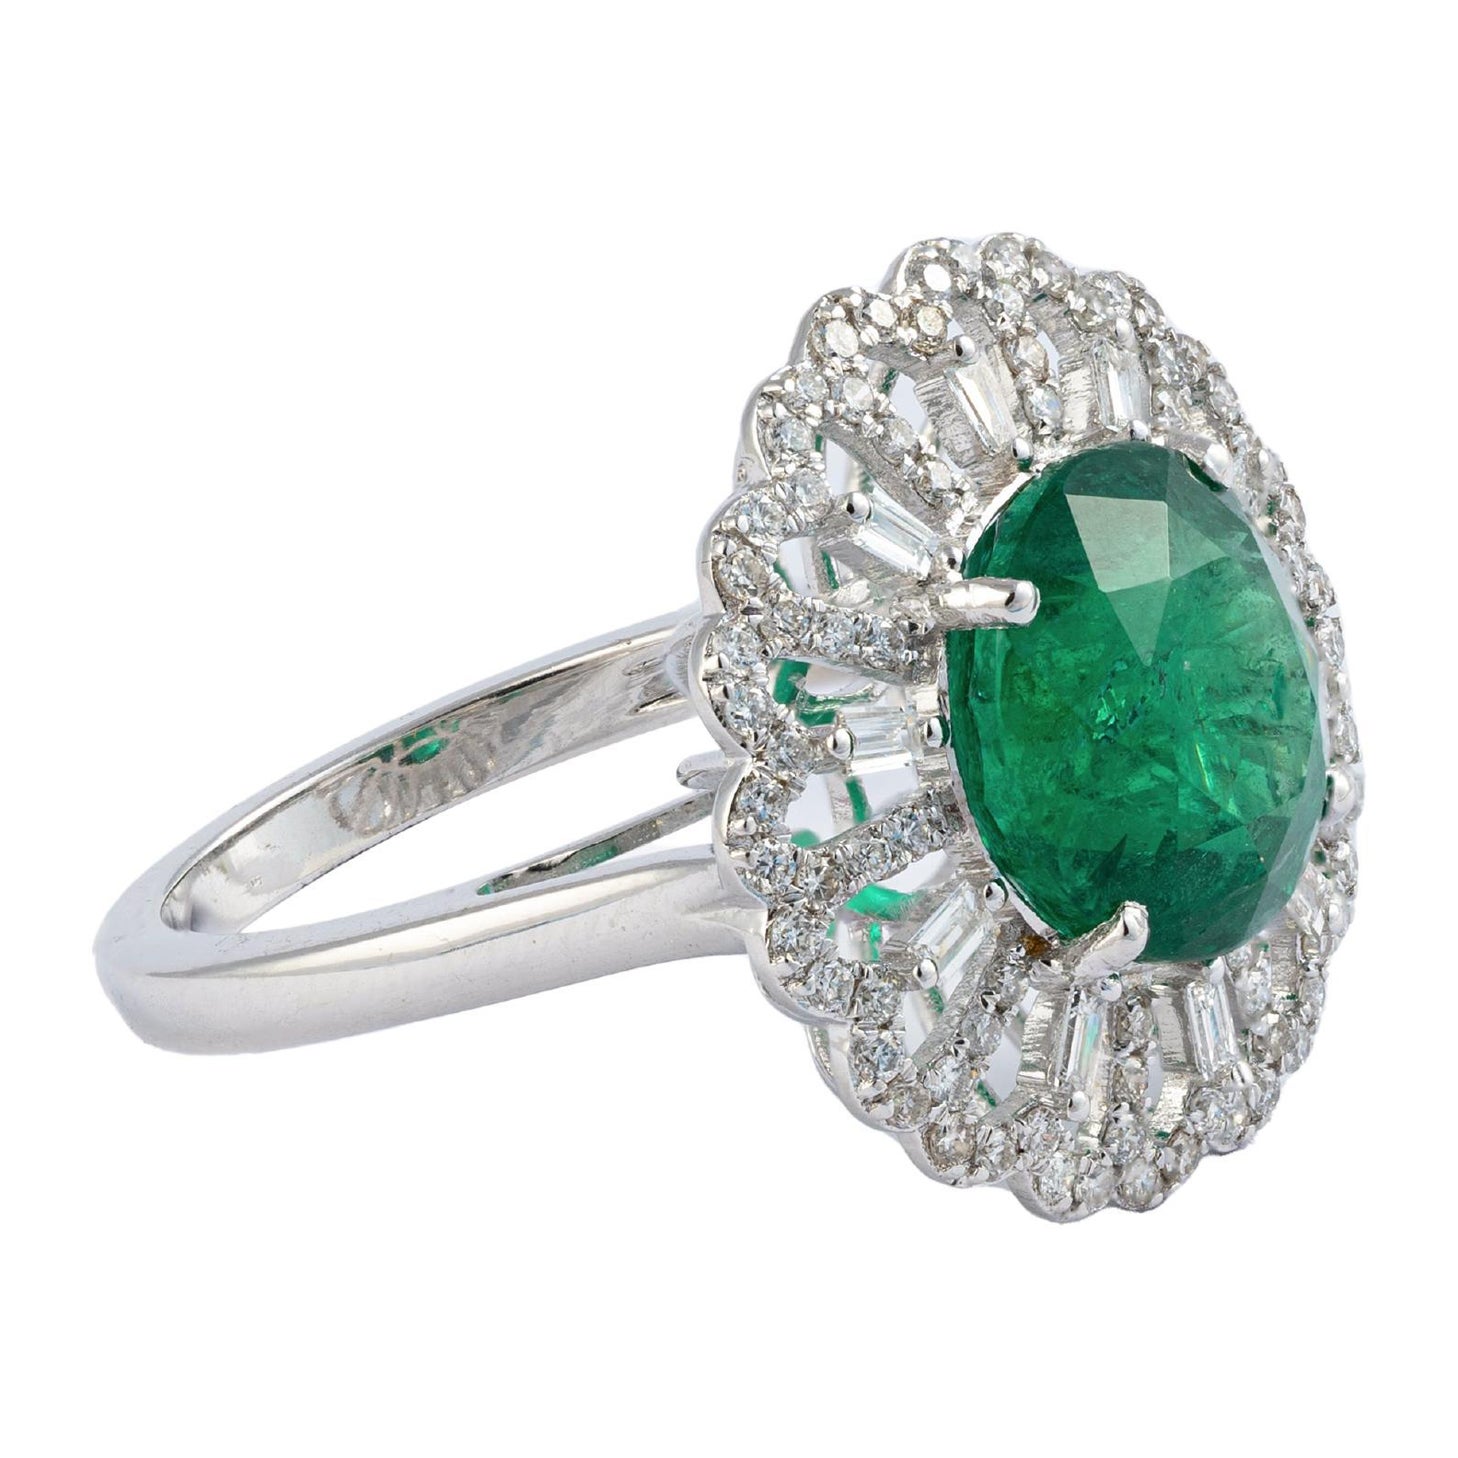 Natural Zambian Emerald 5.71cts with 0.77cts Diamonds ring in 14k Gold